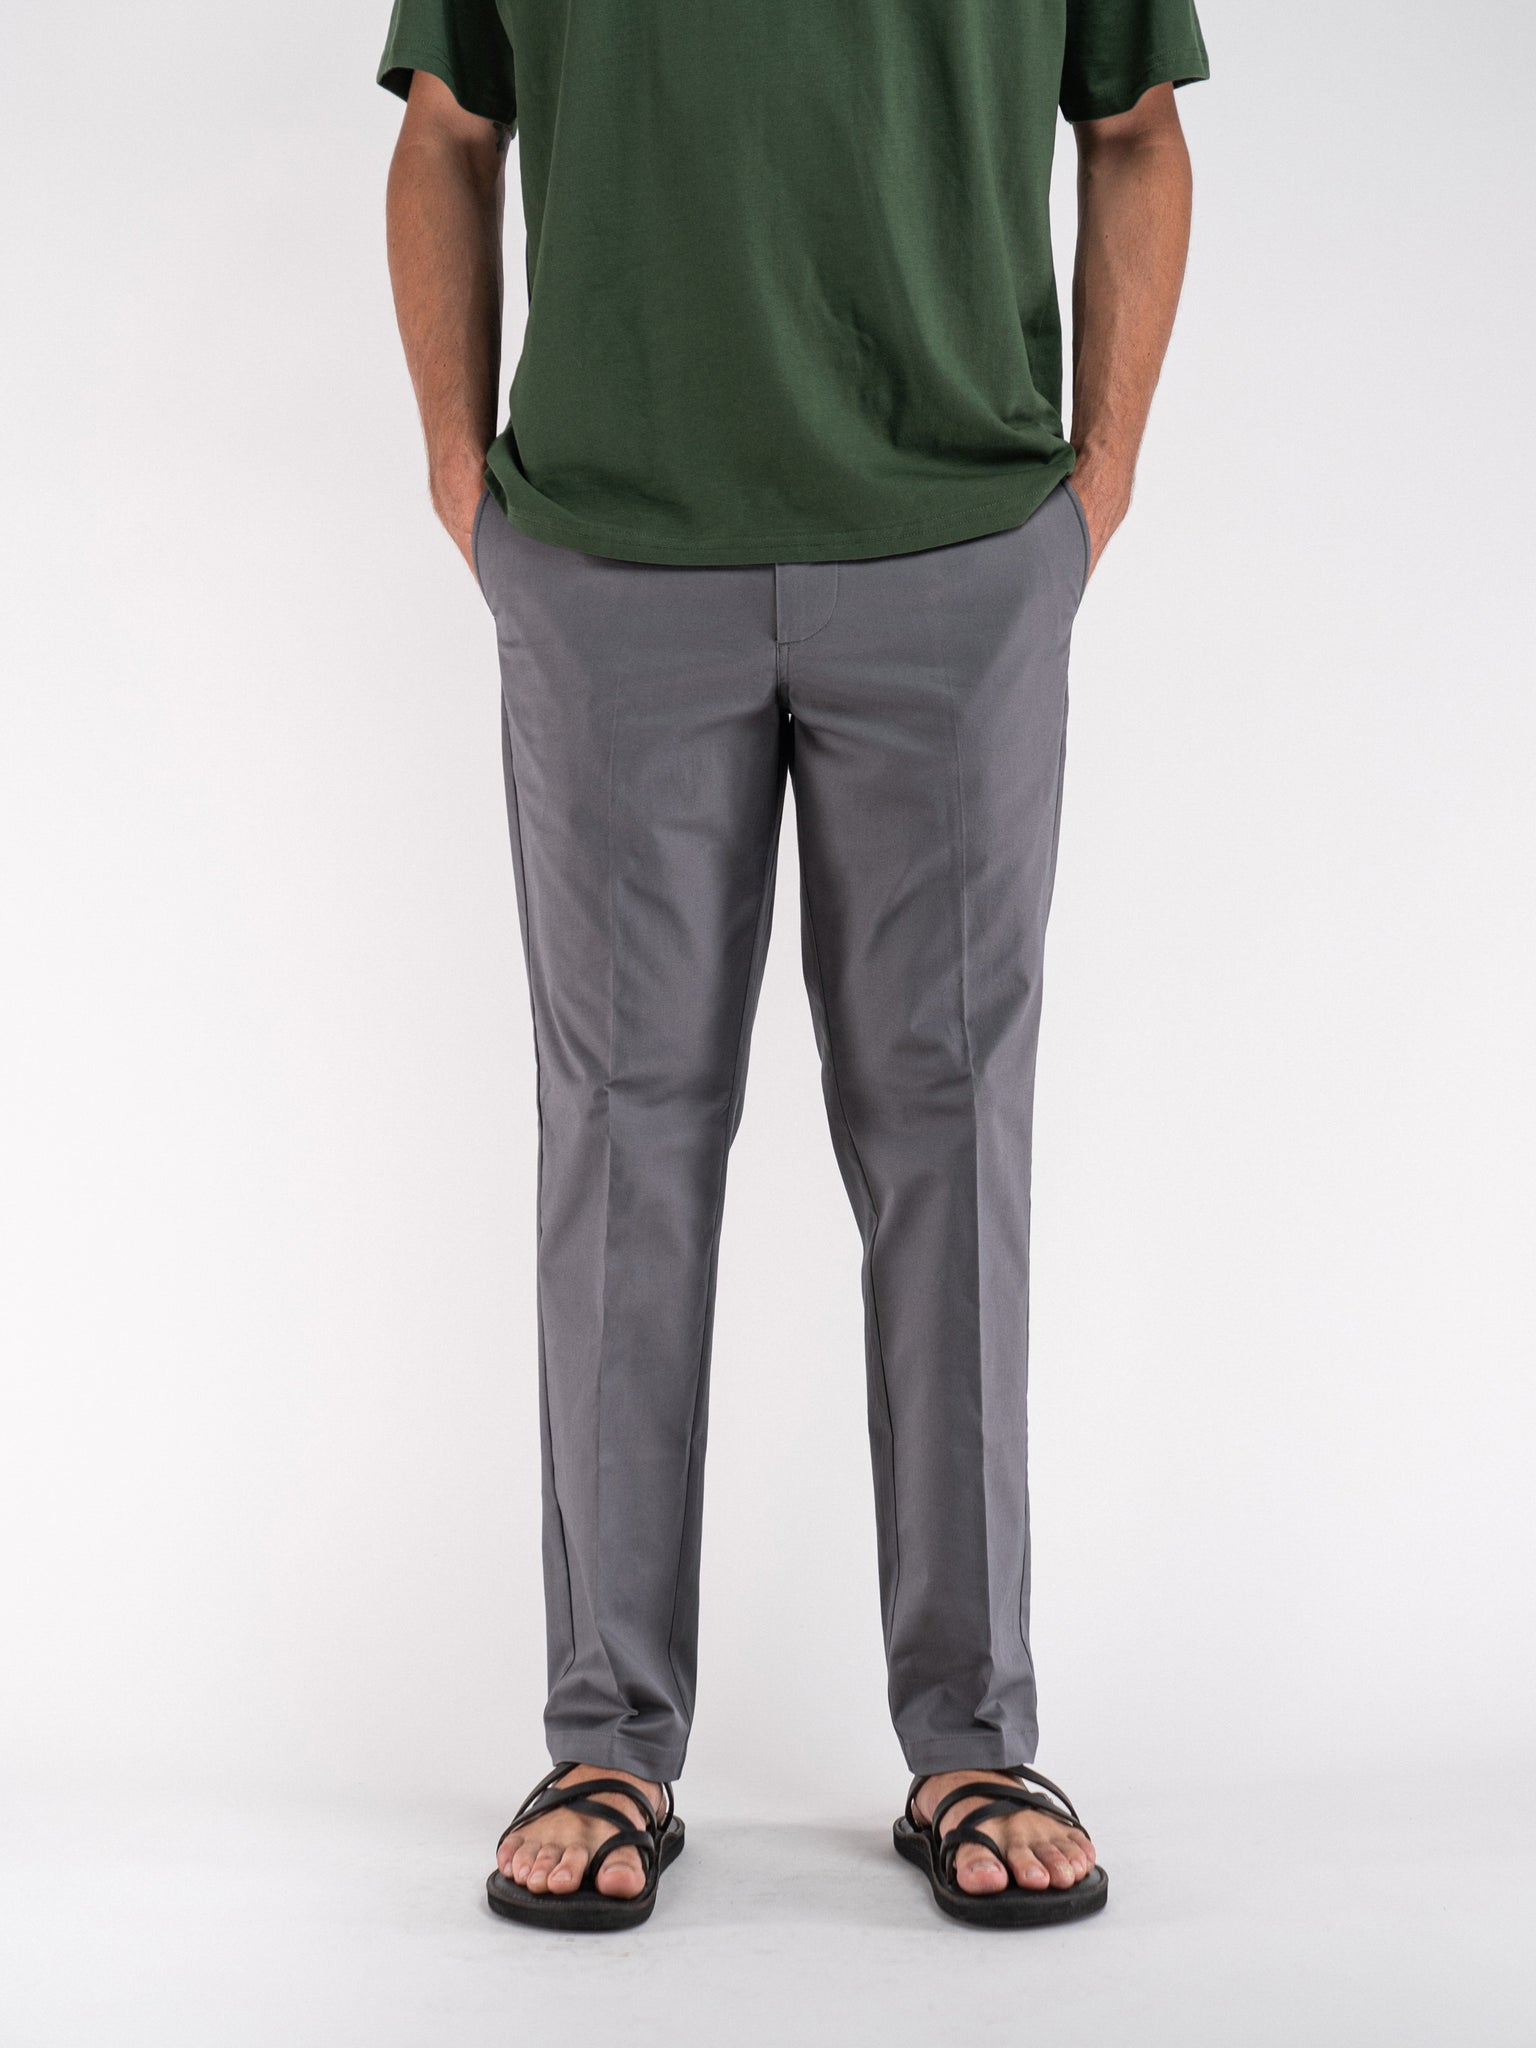 Standard Fit Chino Pant Charcoal Gray